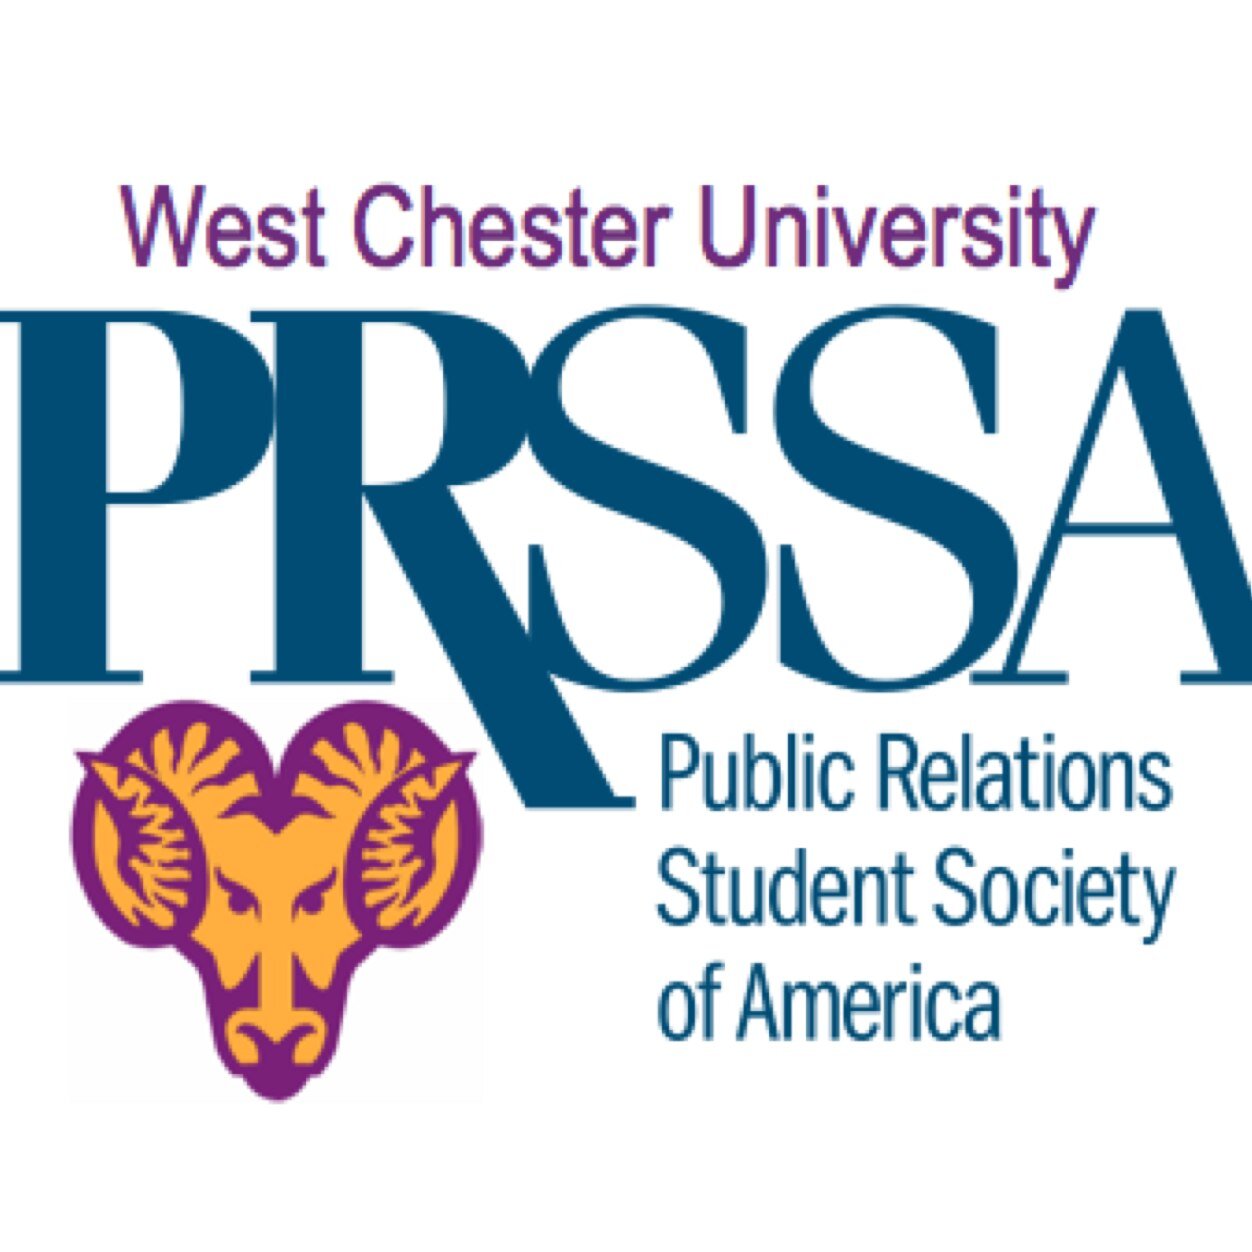 West Chester University's chapter of the Public Relations Student Society of America (PRSSA).